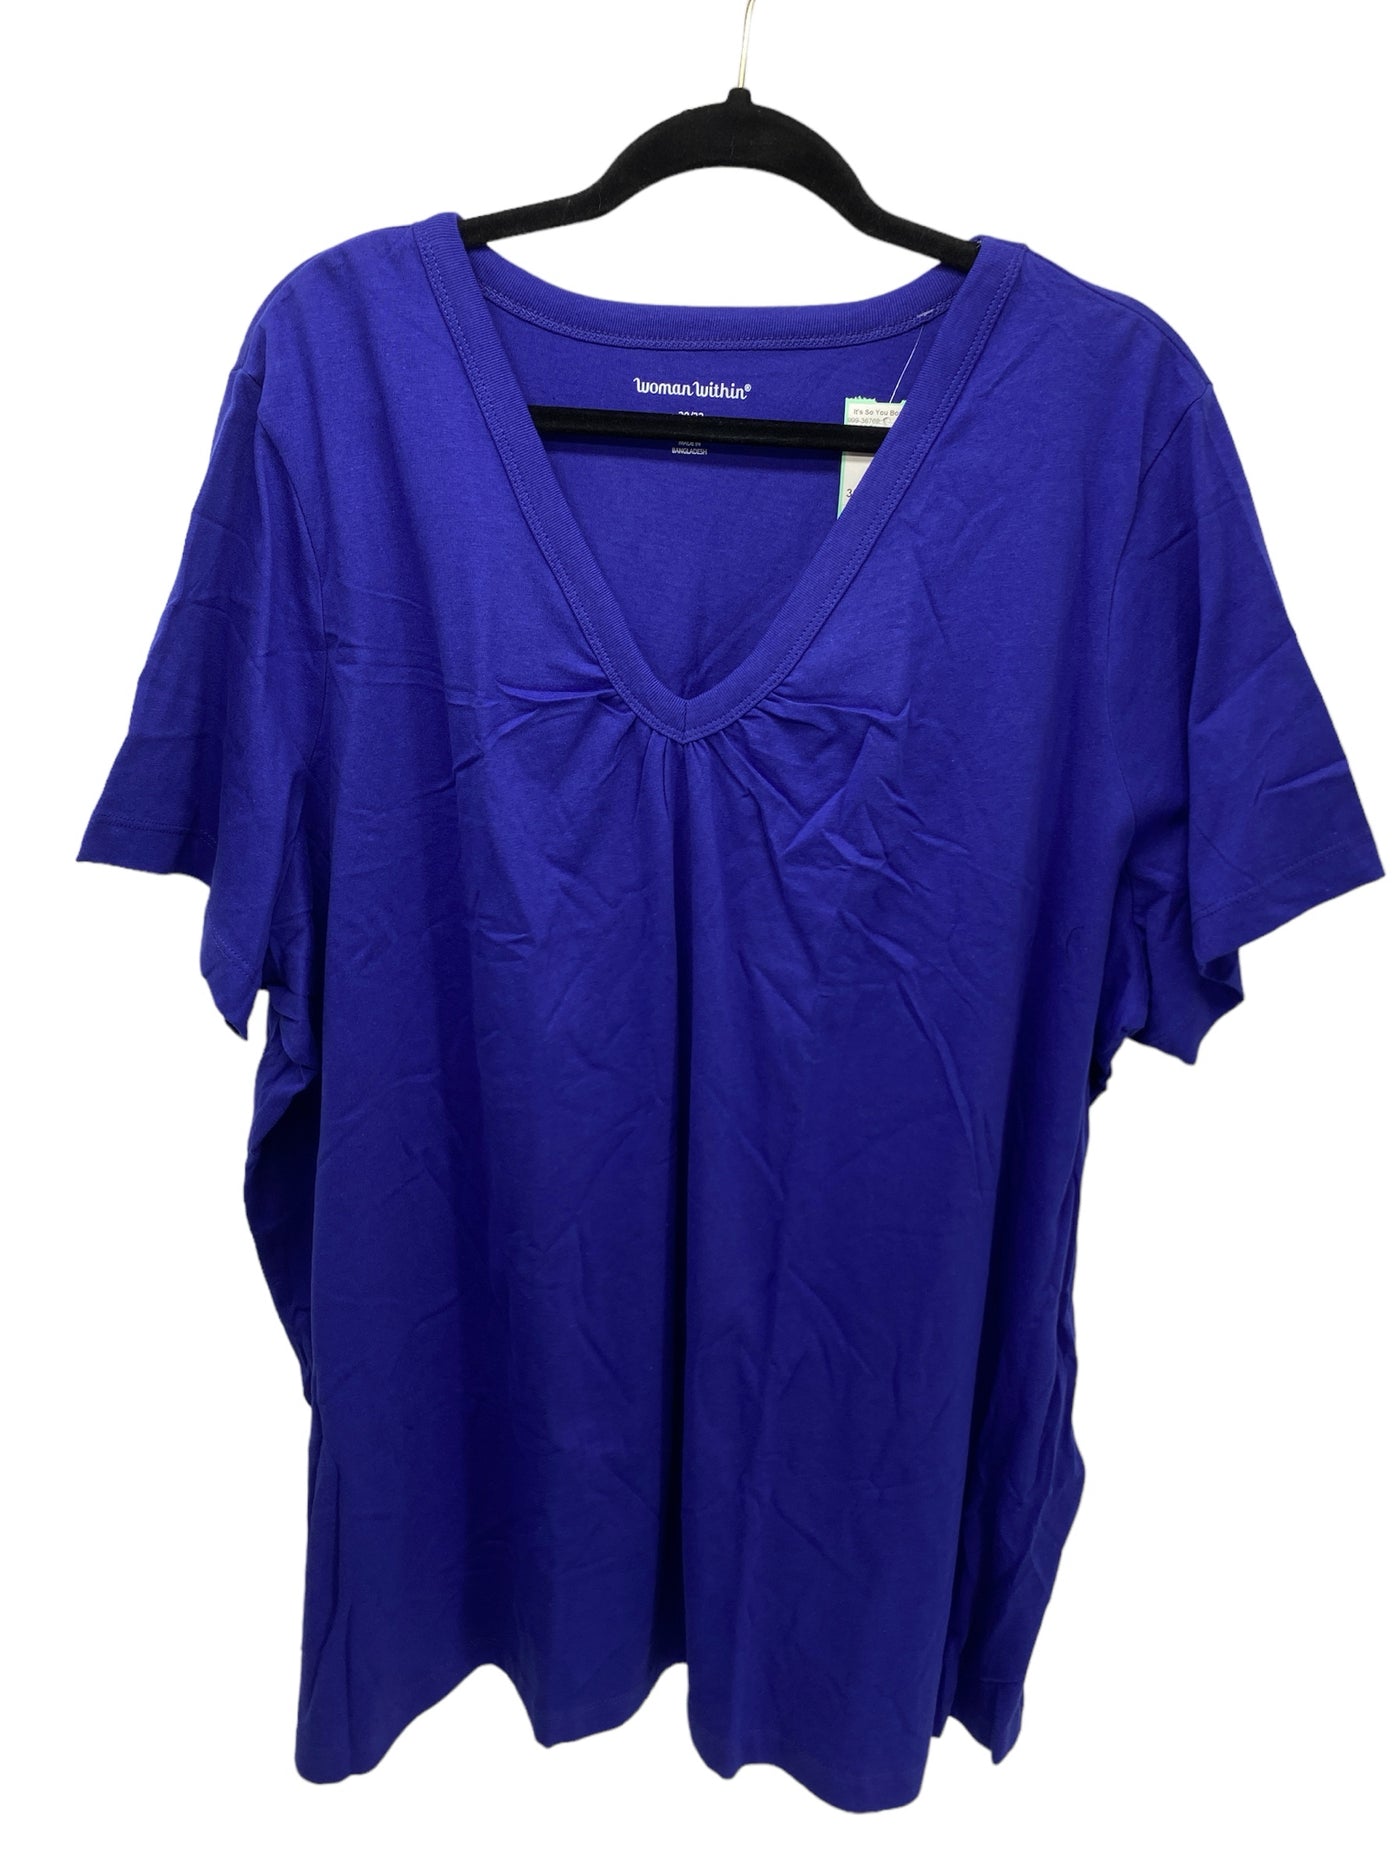 Woman Within Women Size 30/32 Blue CD SS Blouse